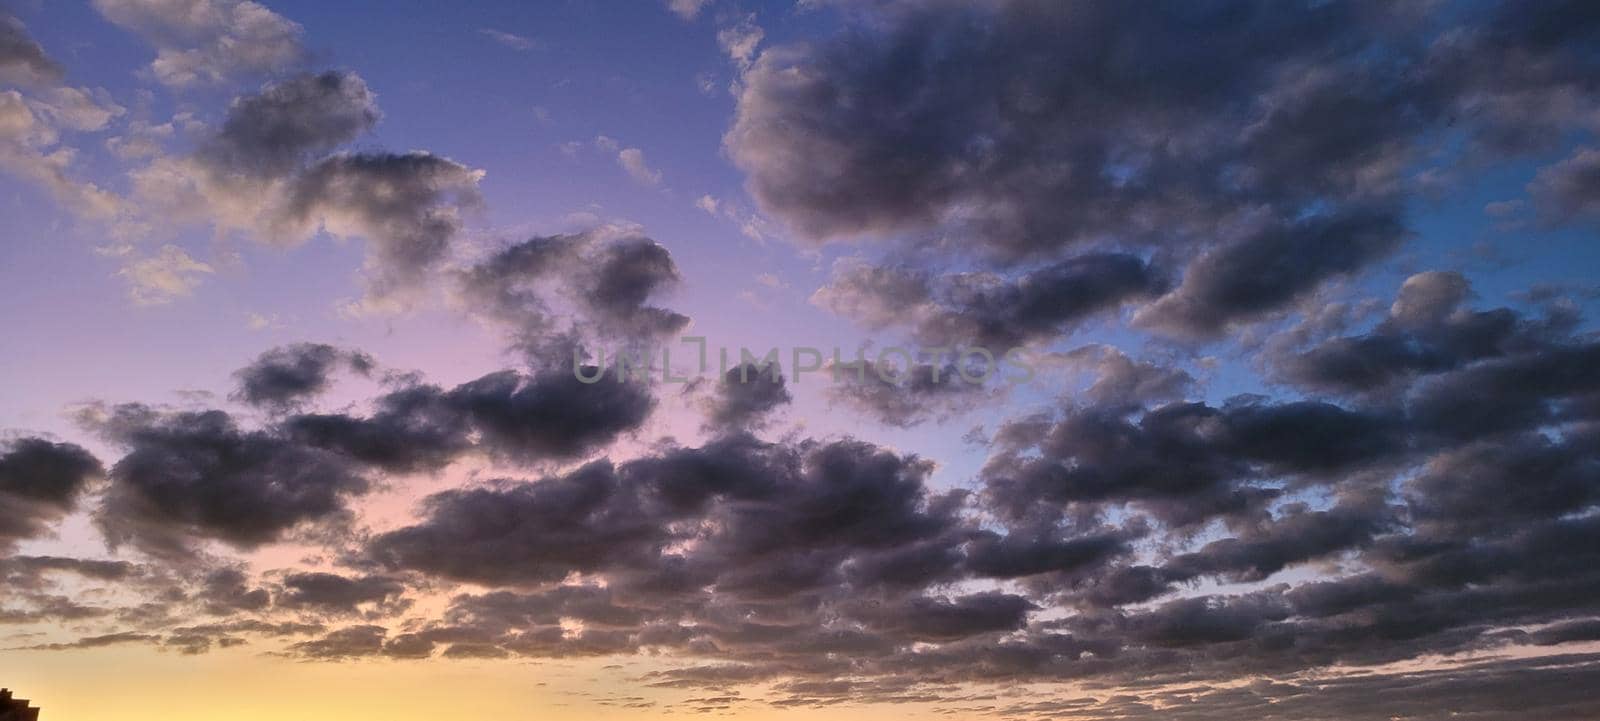 image of colorful sky with dark clouds in late afternoon in Brazil